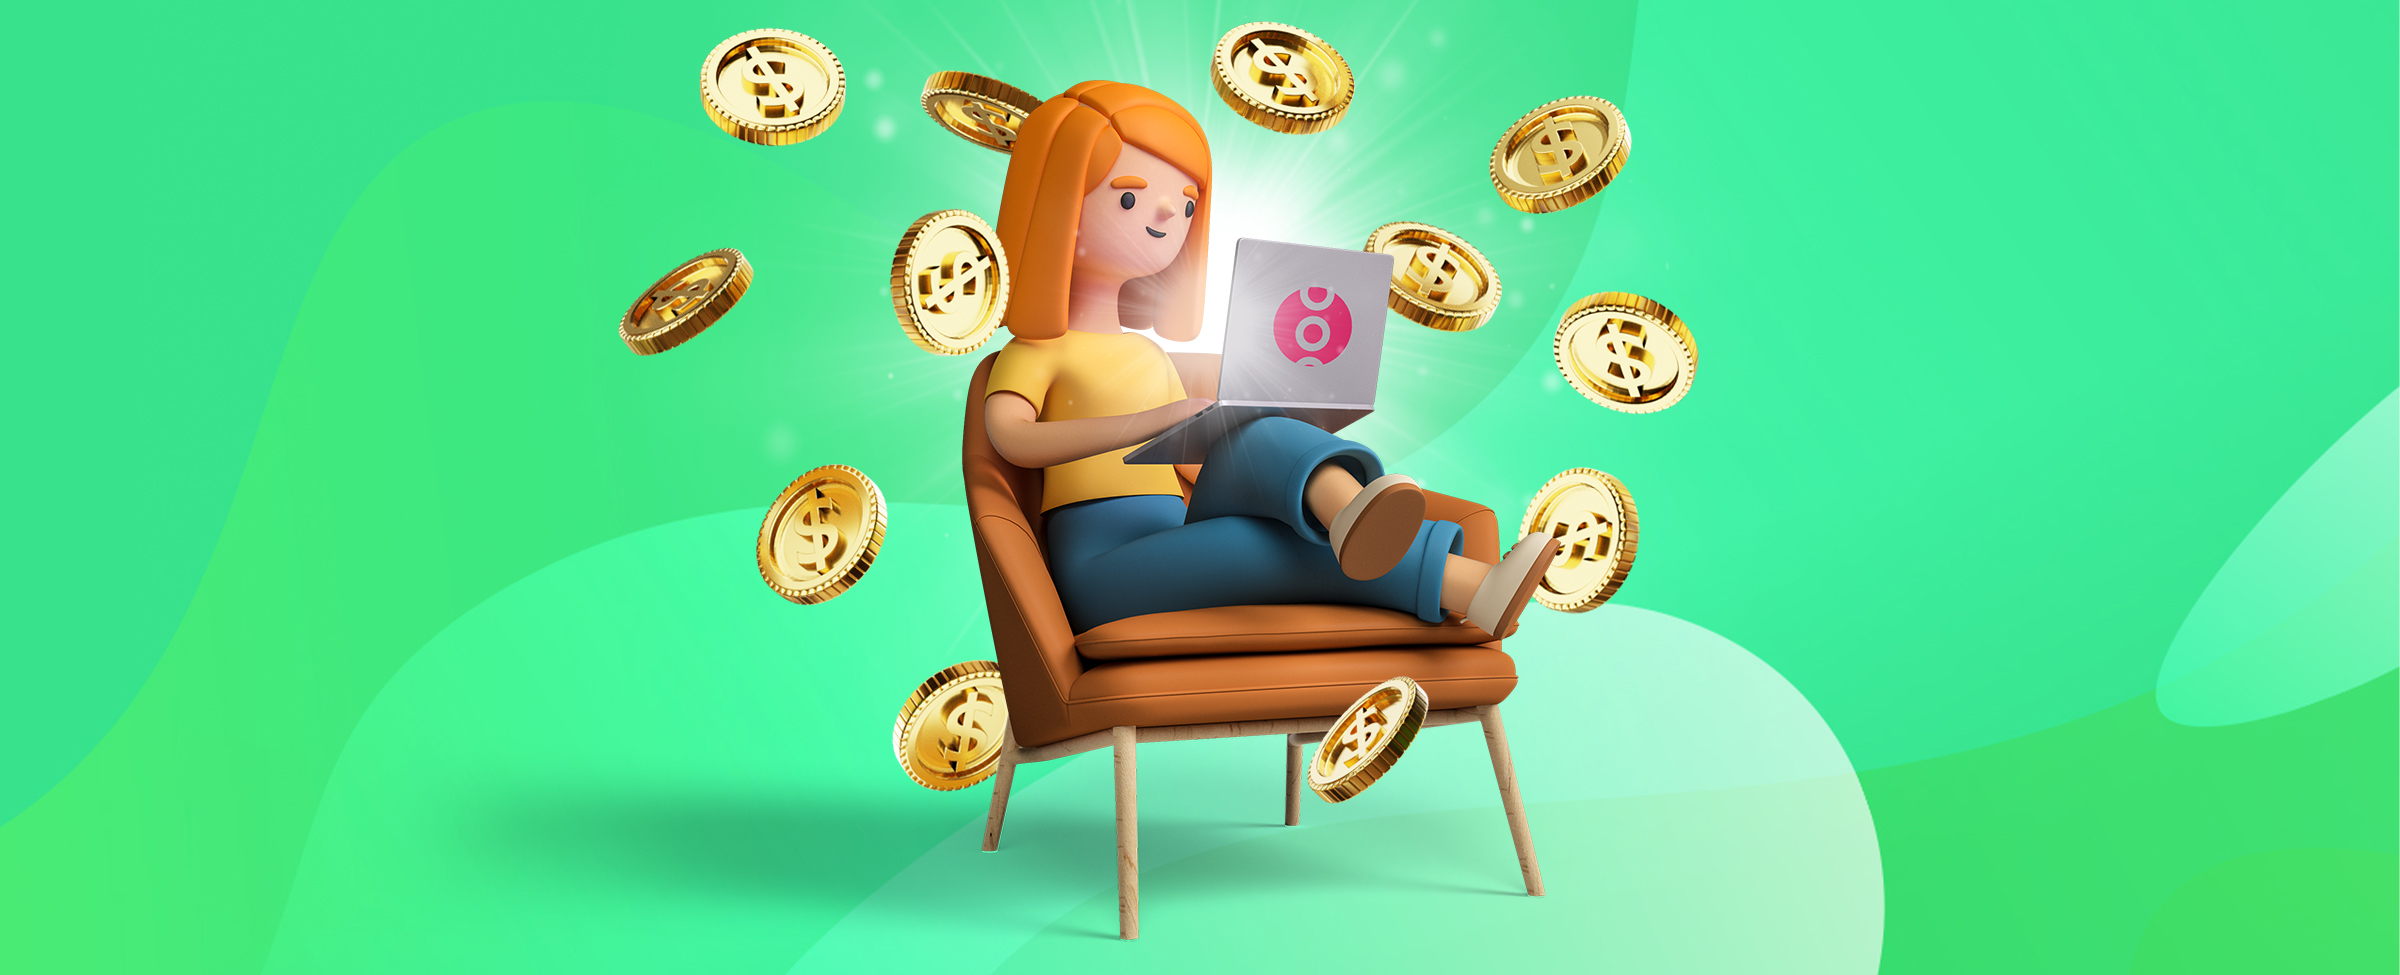 A 3D-animated claymation girl with orange hair, yellow sweater and blue jeans sits cross-legged on a brown chair in the middle of the image, against a green background. On her lap is an open laptop sporting a pink SlotsLV logo sticker on the lid. Hovering around the girl are oversized gold coins.